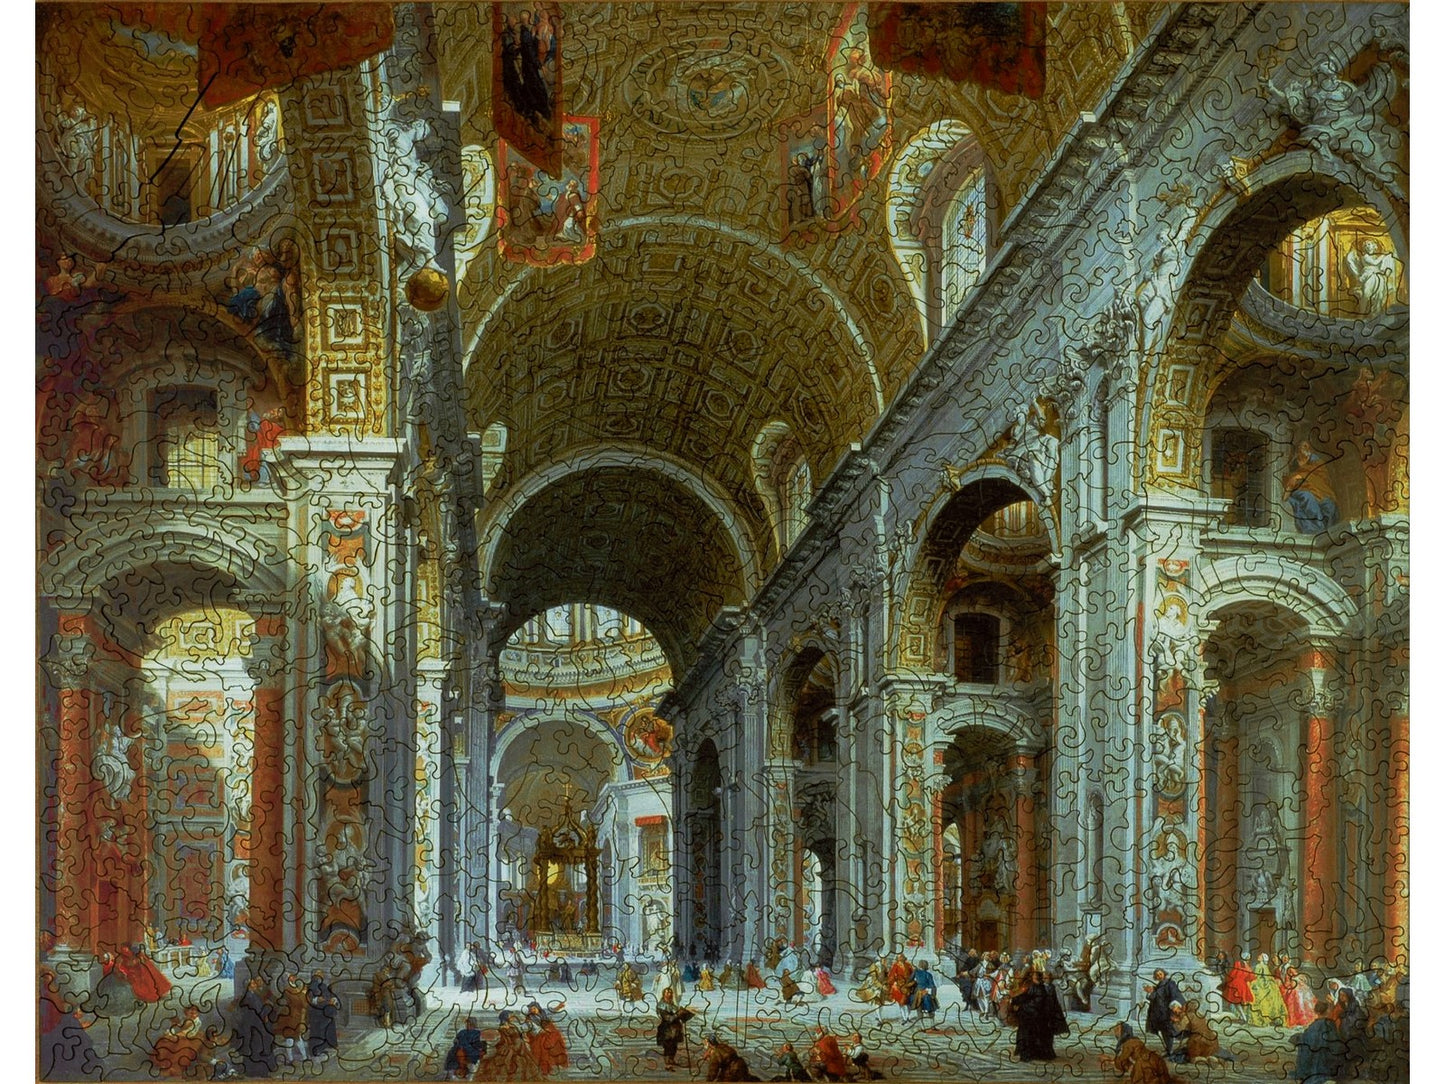 The front of the puzzle, Interior of St. Peter's, Rome, which shows the inside of an large, ornate church.